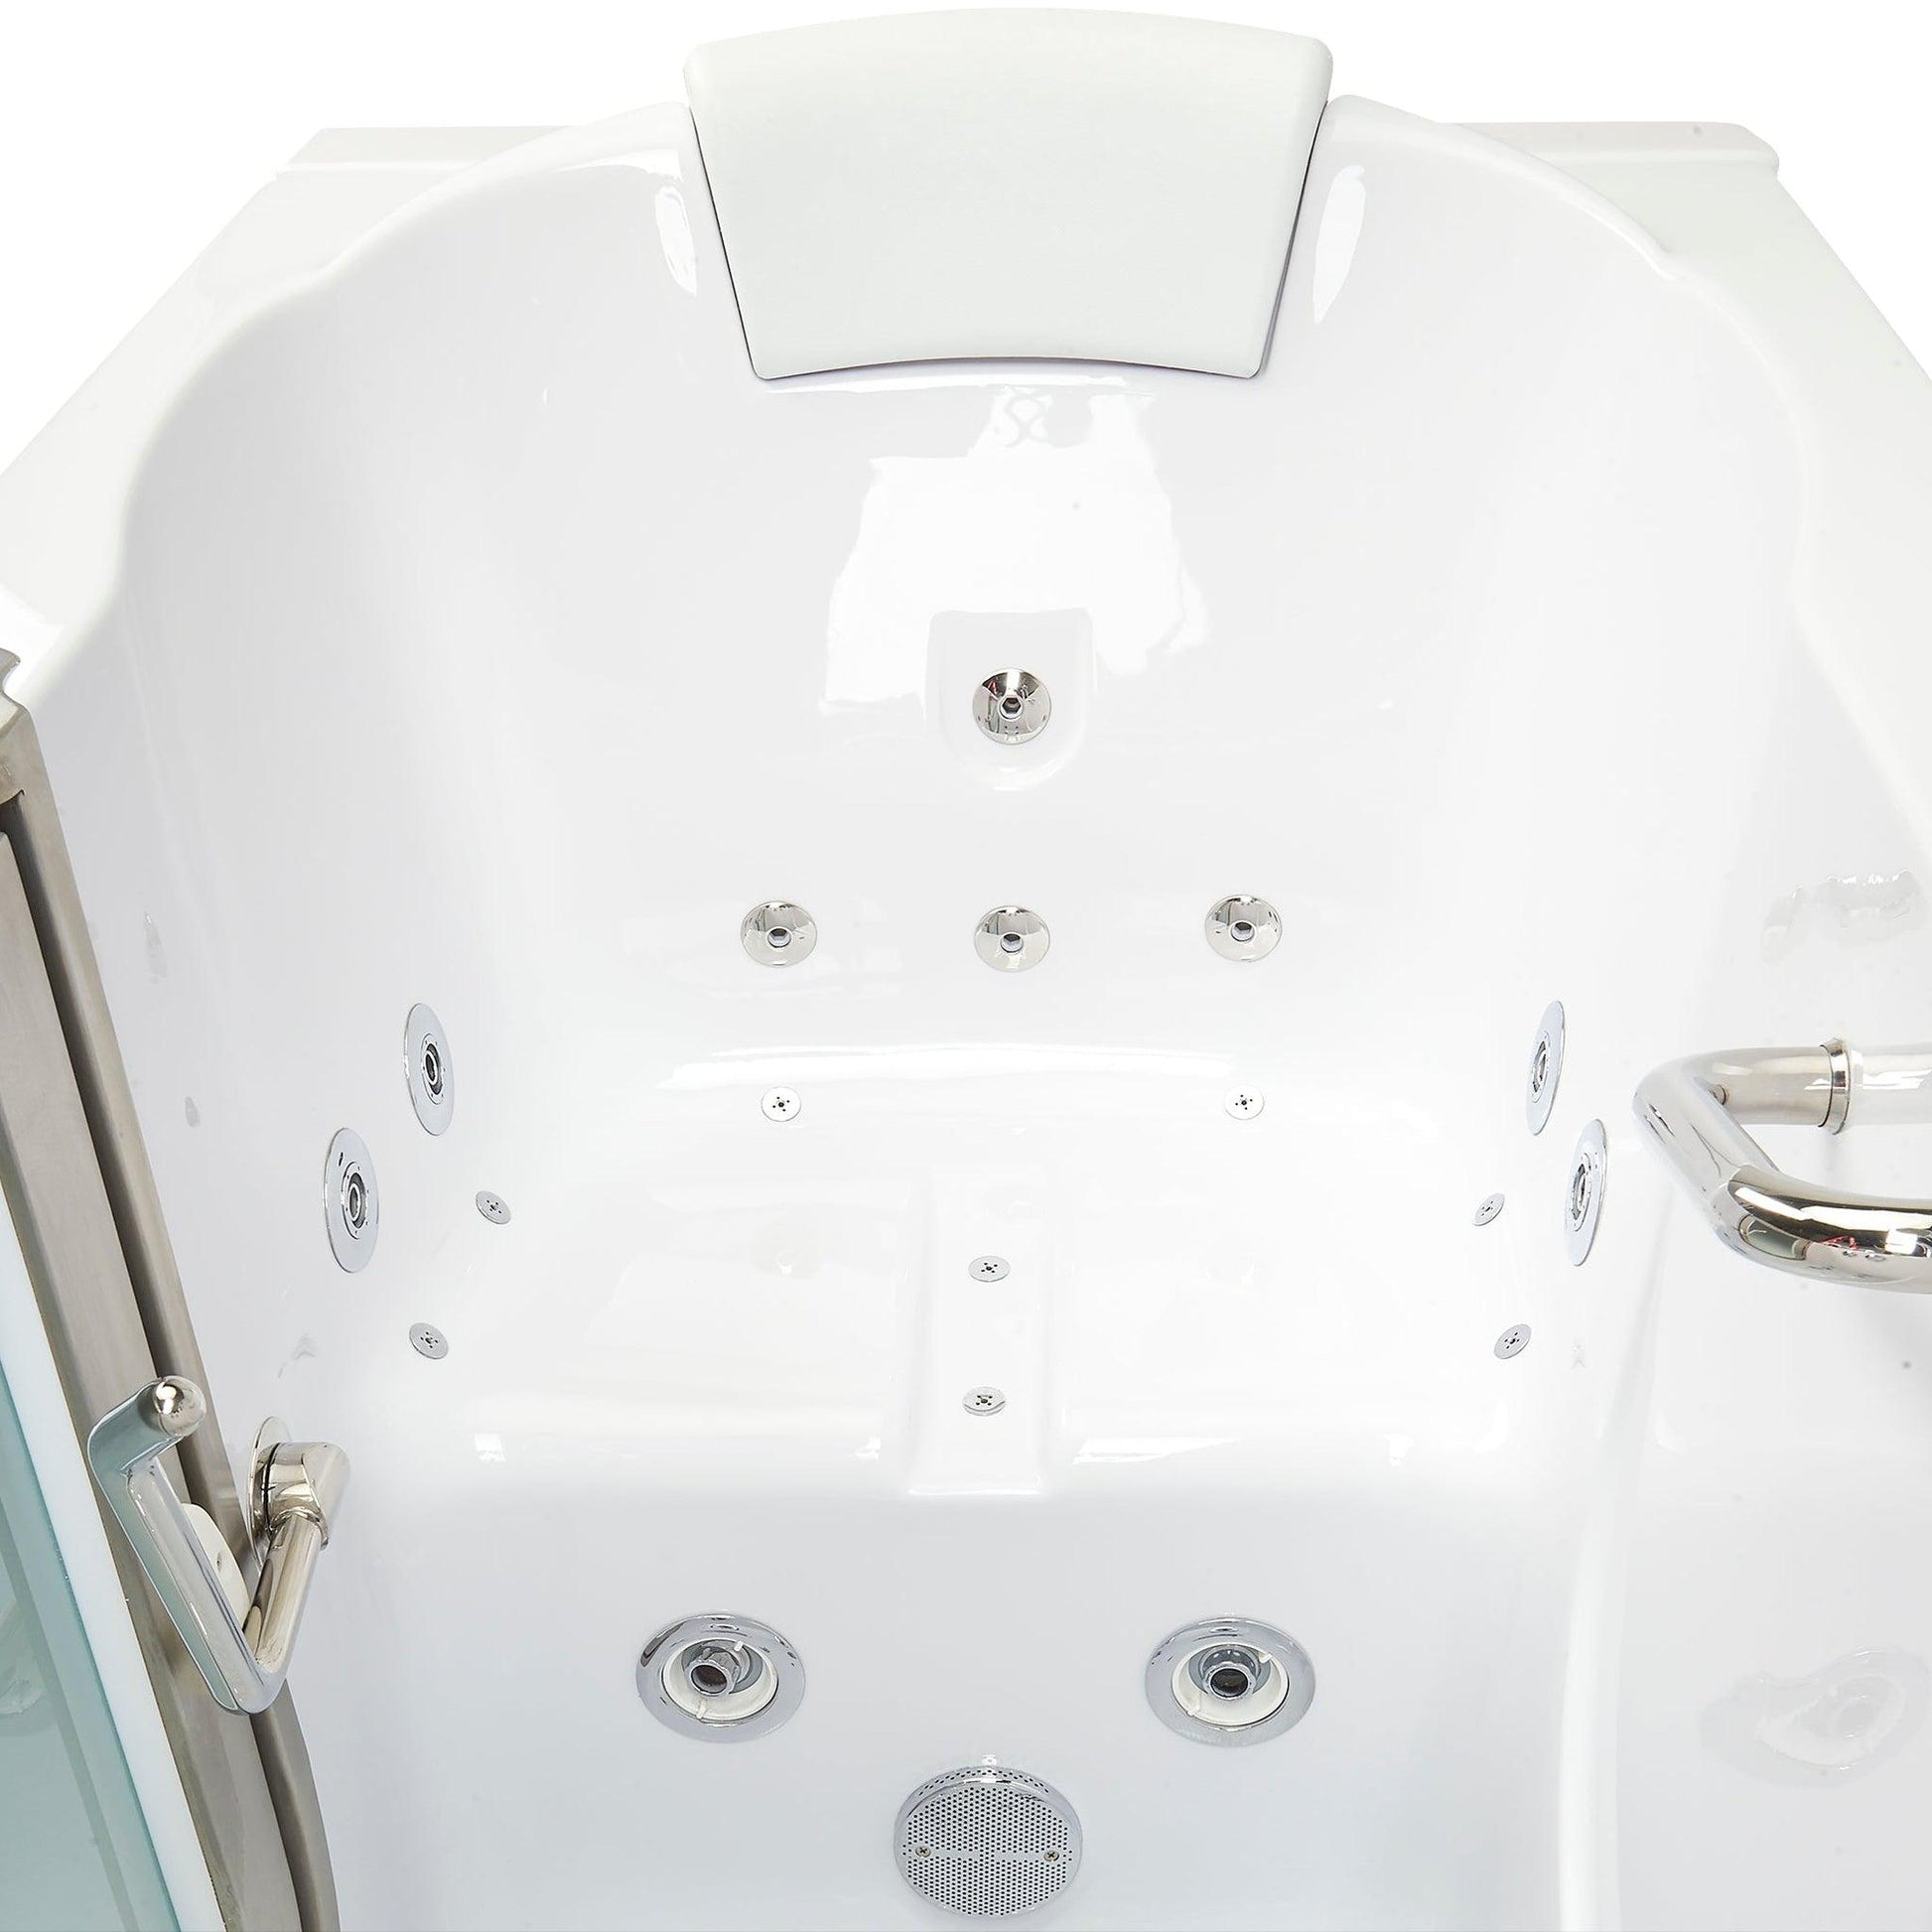 Ella's Bubbles Deluxe 30" x 55" White Acrylic Air and Hydro Massage Walk-In Bathtub With 5-Piece Fast Fill Faucet, 2" Dual Drain and Right Inward Swing Door